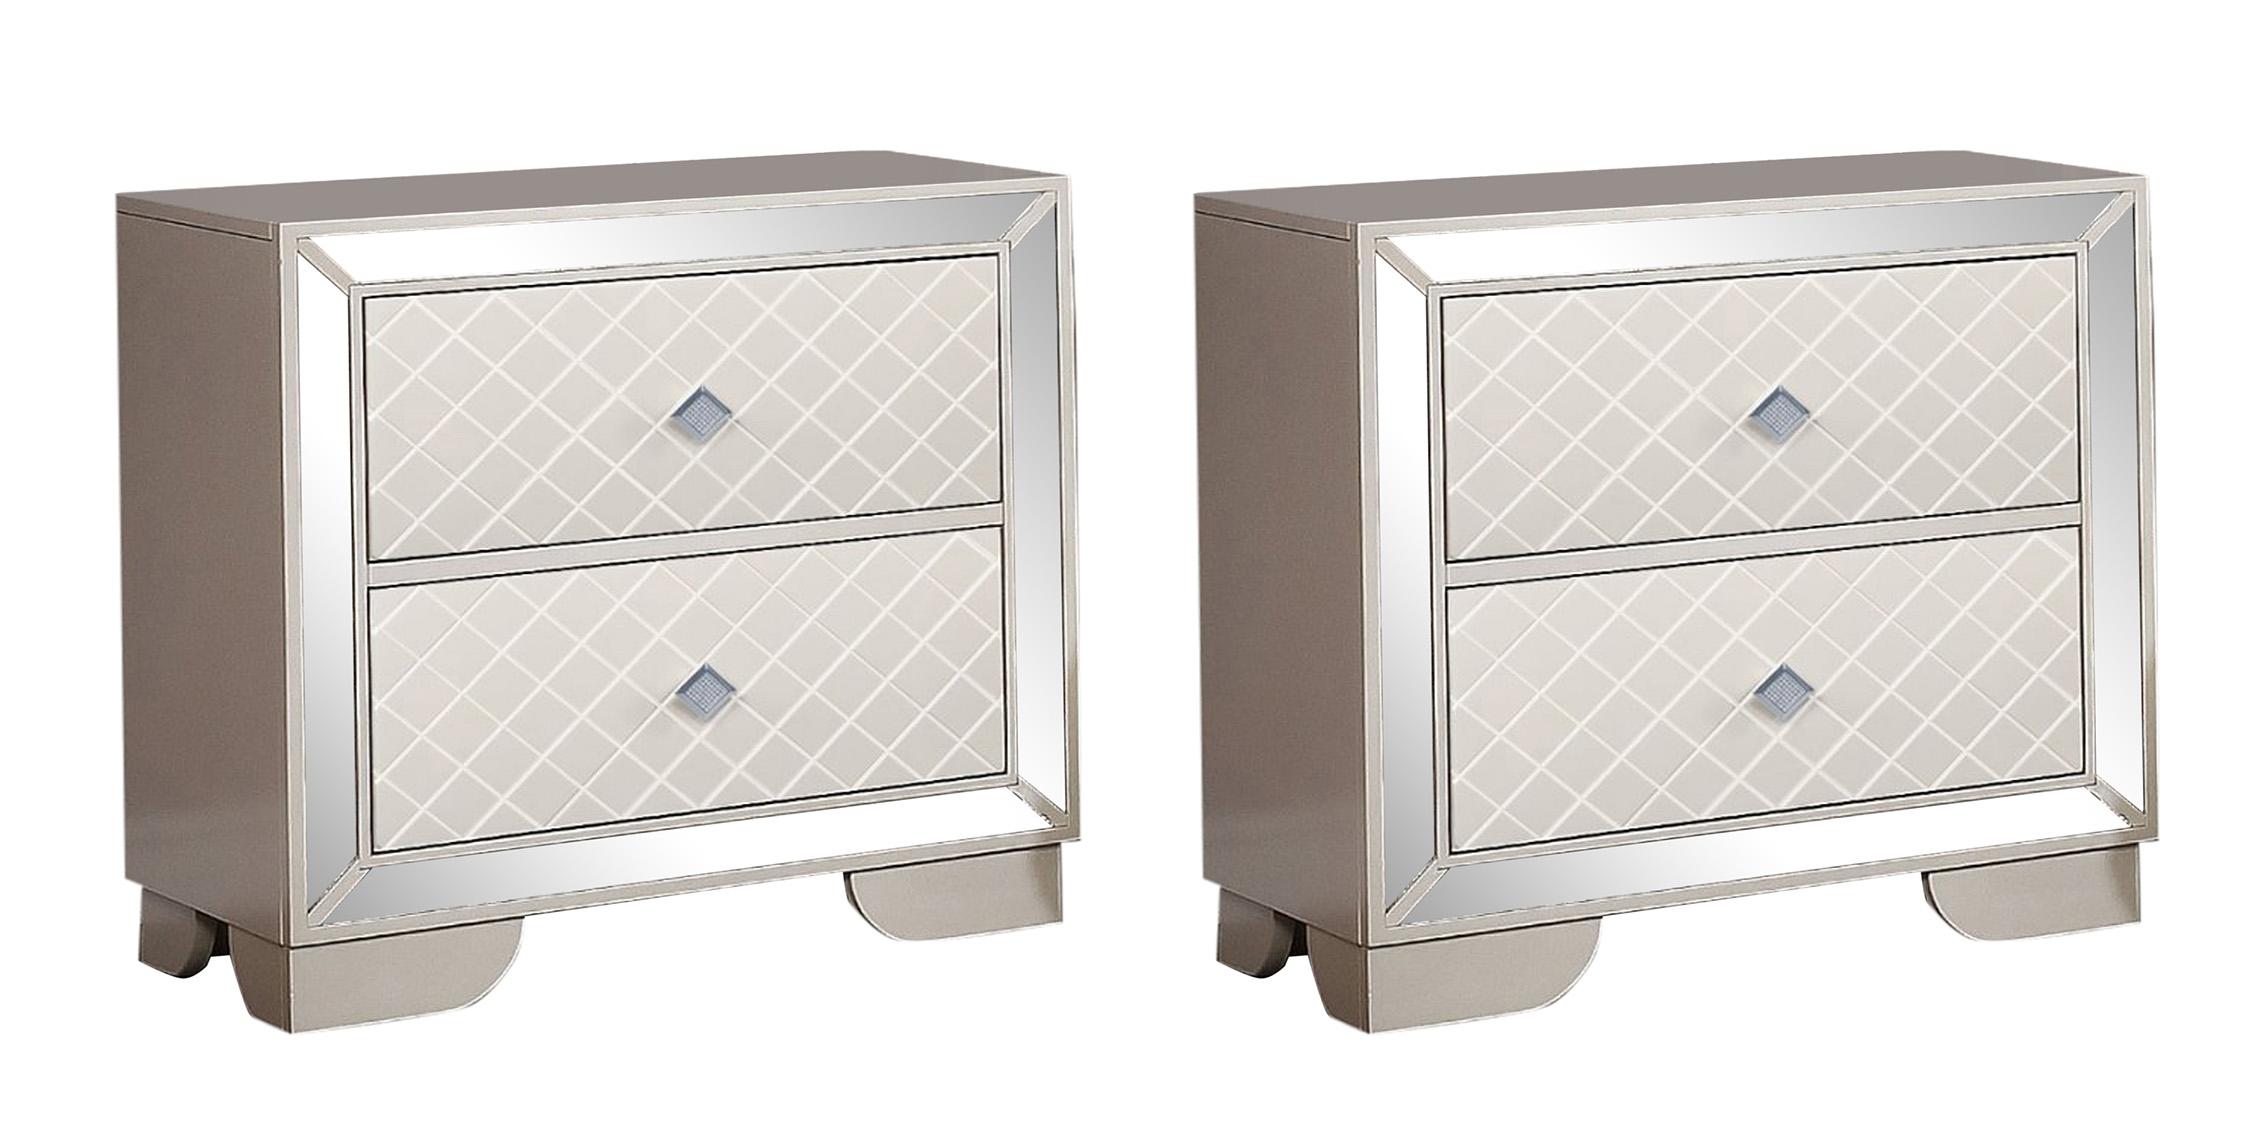 Contemporary, Modern Nightstand Set MADISON GHF-808857830470-2PC in Beige 